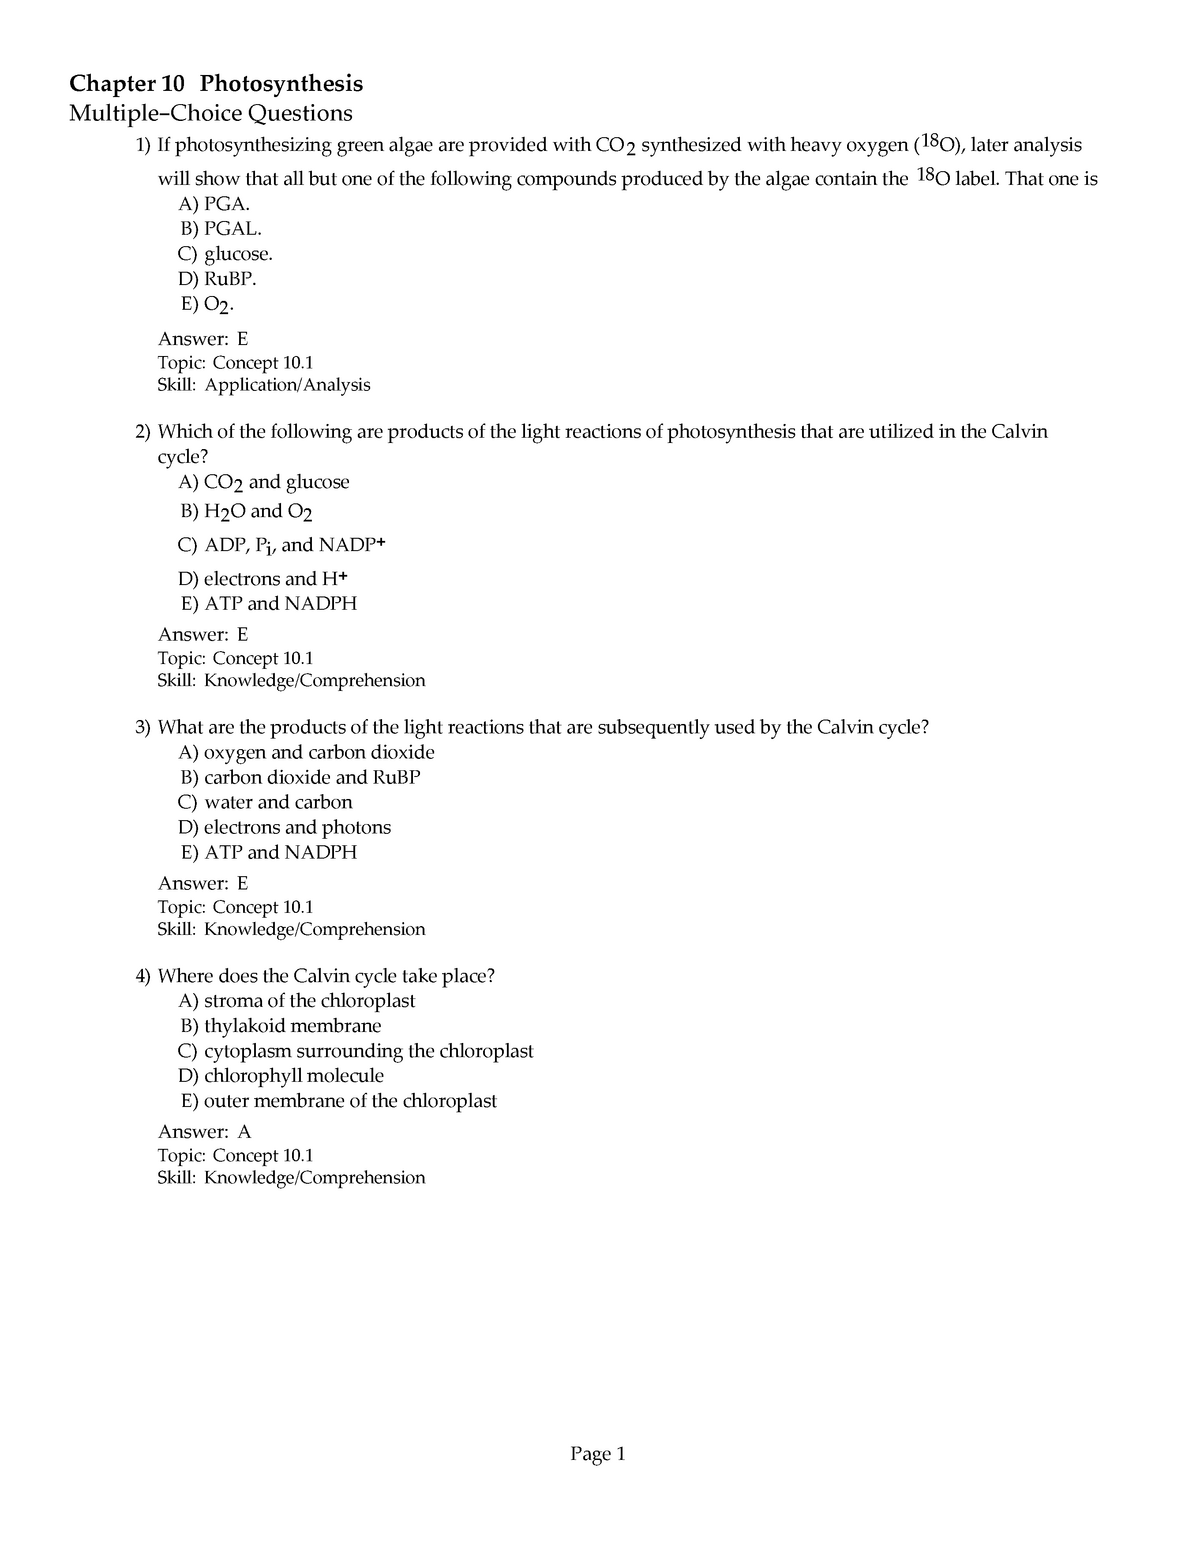 ap biology photosynthesis short answer questions